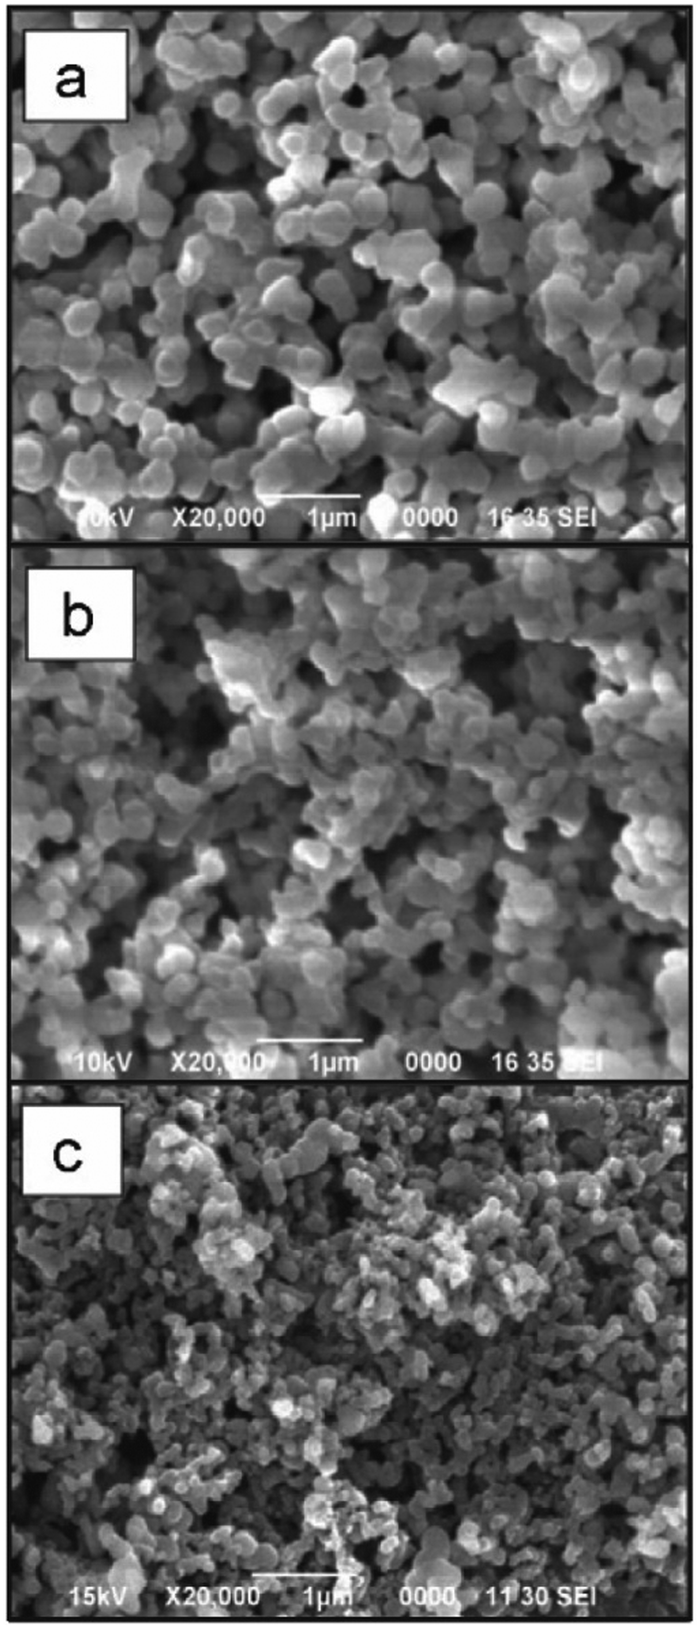 Polysaccharide nanoparticles: from fabrication to applications - Journal of  Materials Chemistry B (RSC Publishing) DOI:10.1039/D1TB00628B